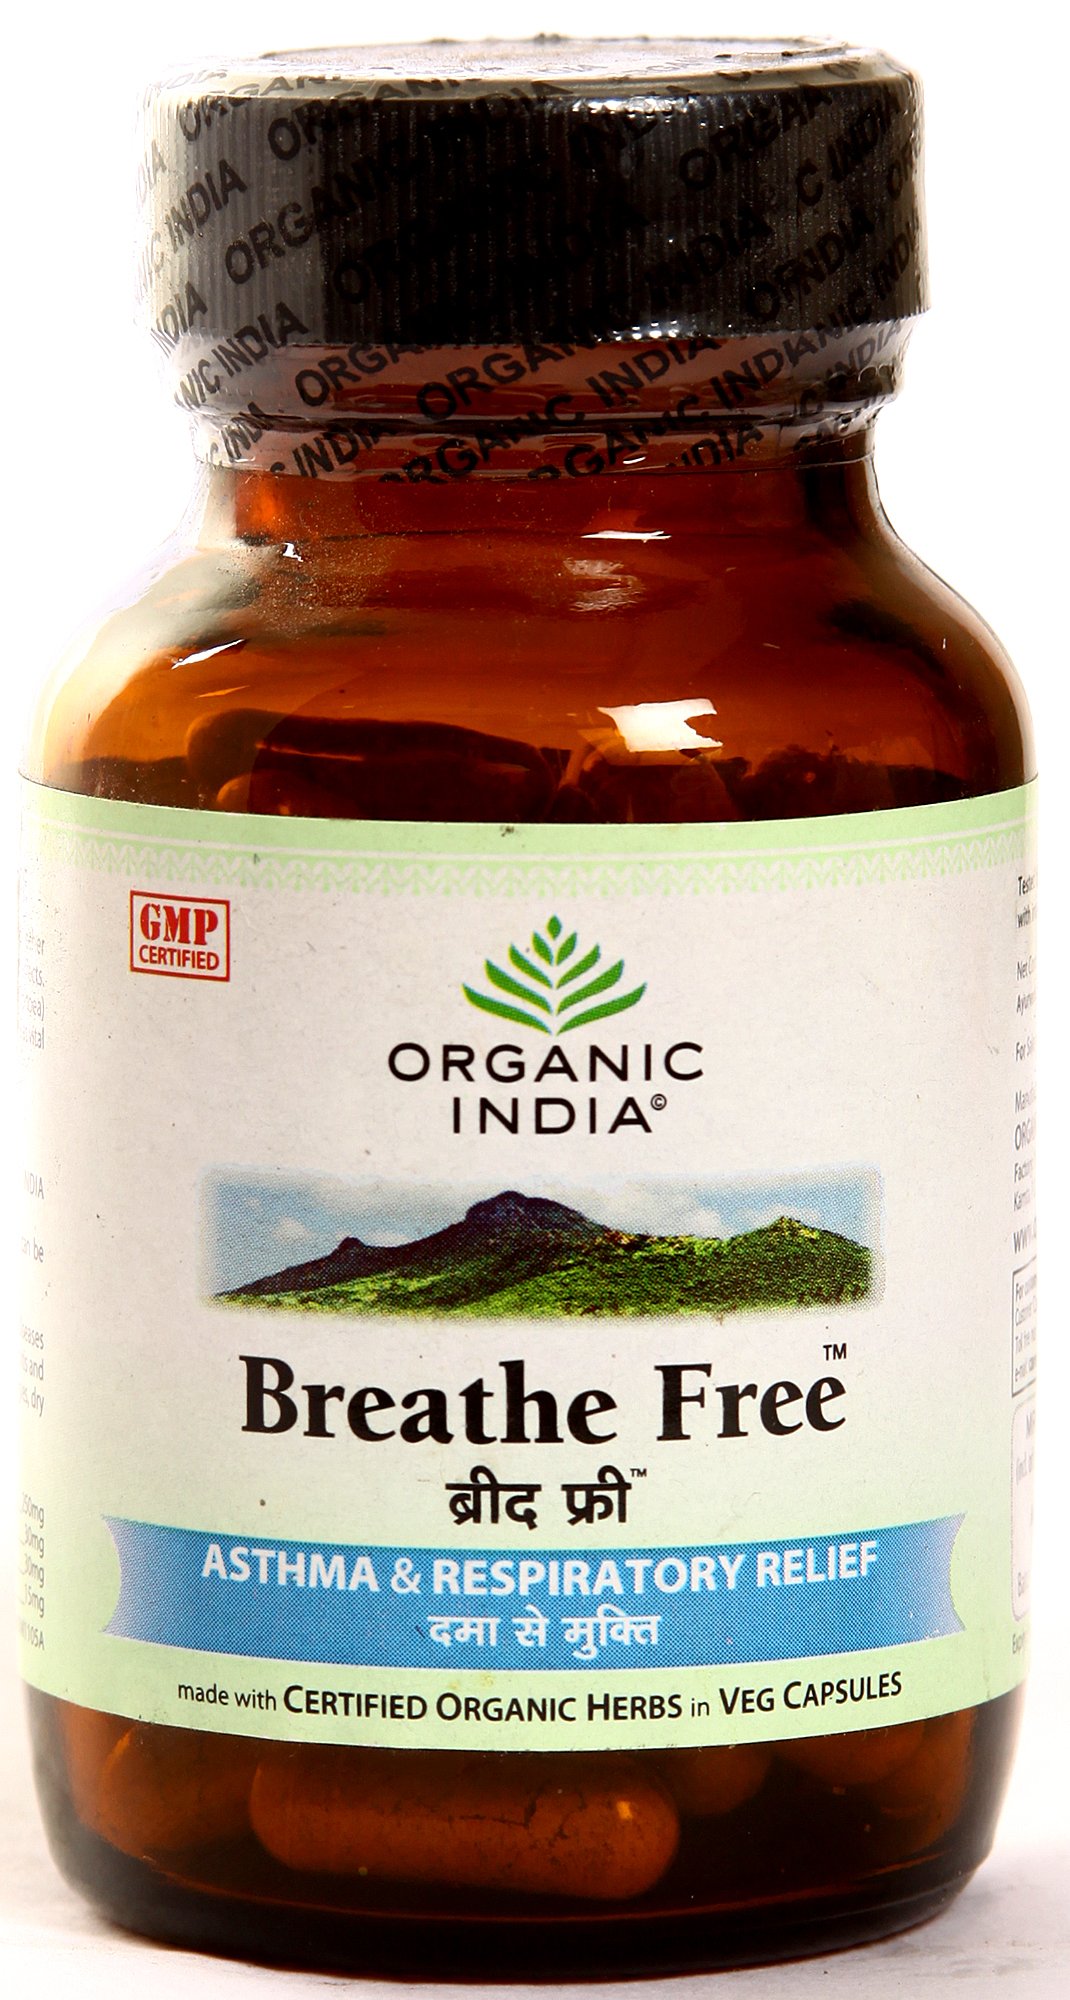 Breathe Free (Asthma & Respiratory Relief) - book cover